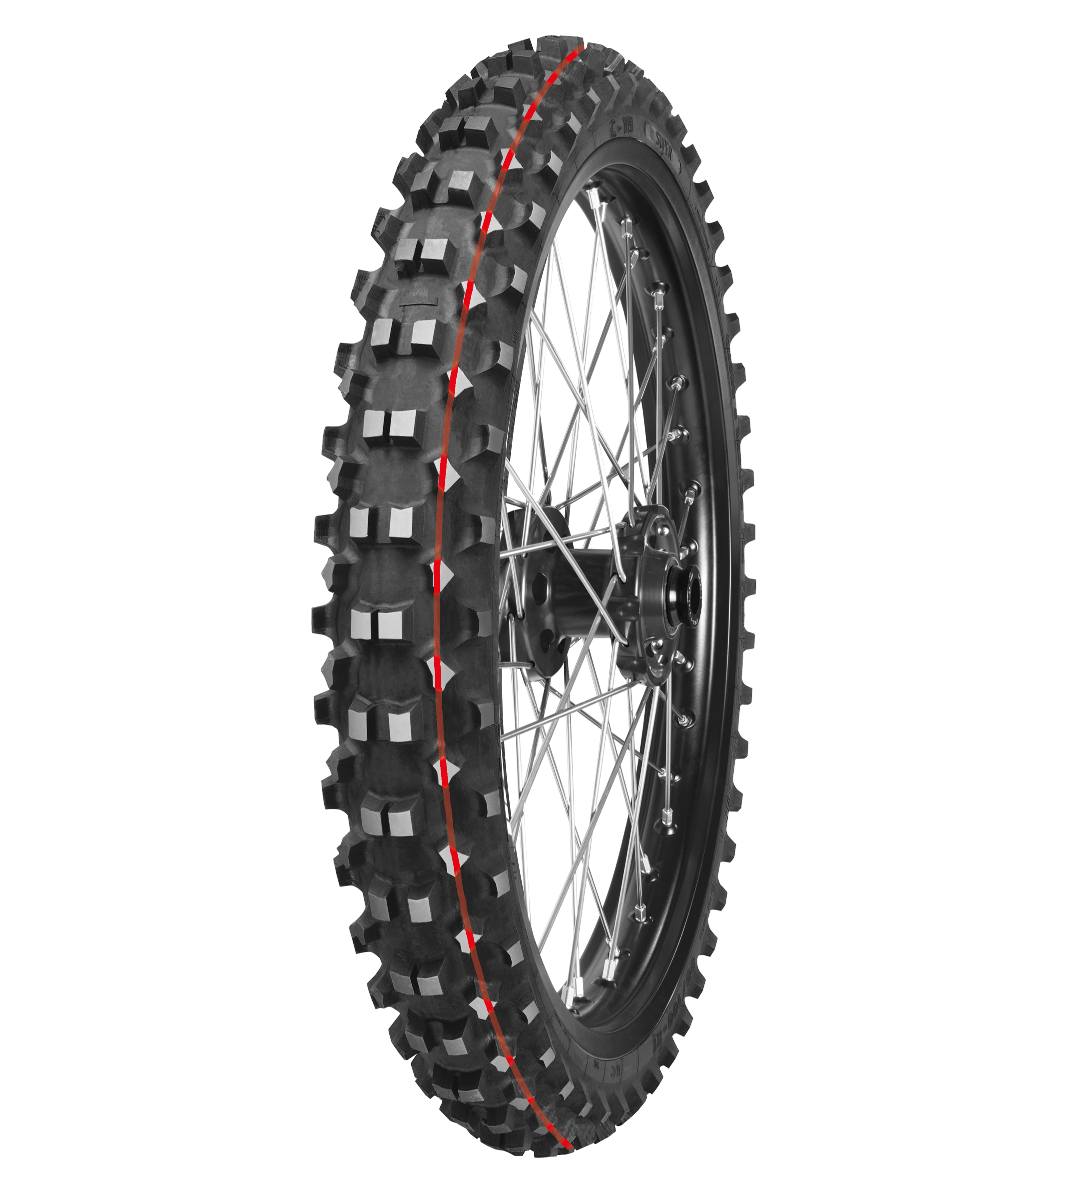 Mitas C-19 EAGLE 2.50-12 Motocross Competition Off-Road INTERMEDIATE TERRAIN 37M Red Tube Front Tire, 226022, 2.50-12, C-19 Eagle, Front, Motocross, Motocross Competition, Off-Road, Tires - Imported and distributed in North & South America by Lindeco Genuine Powersports - Premier Powersports Equipment and Accessories for Motorcycle Enthusiasts, Professional Riders and Dealers.